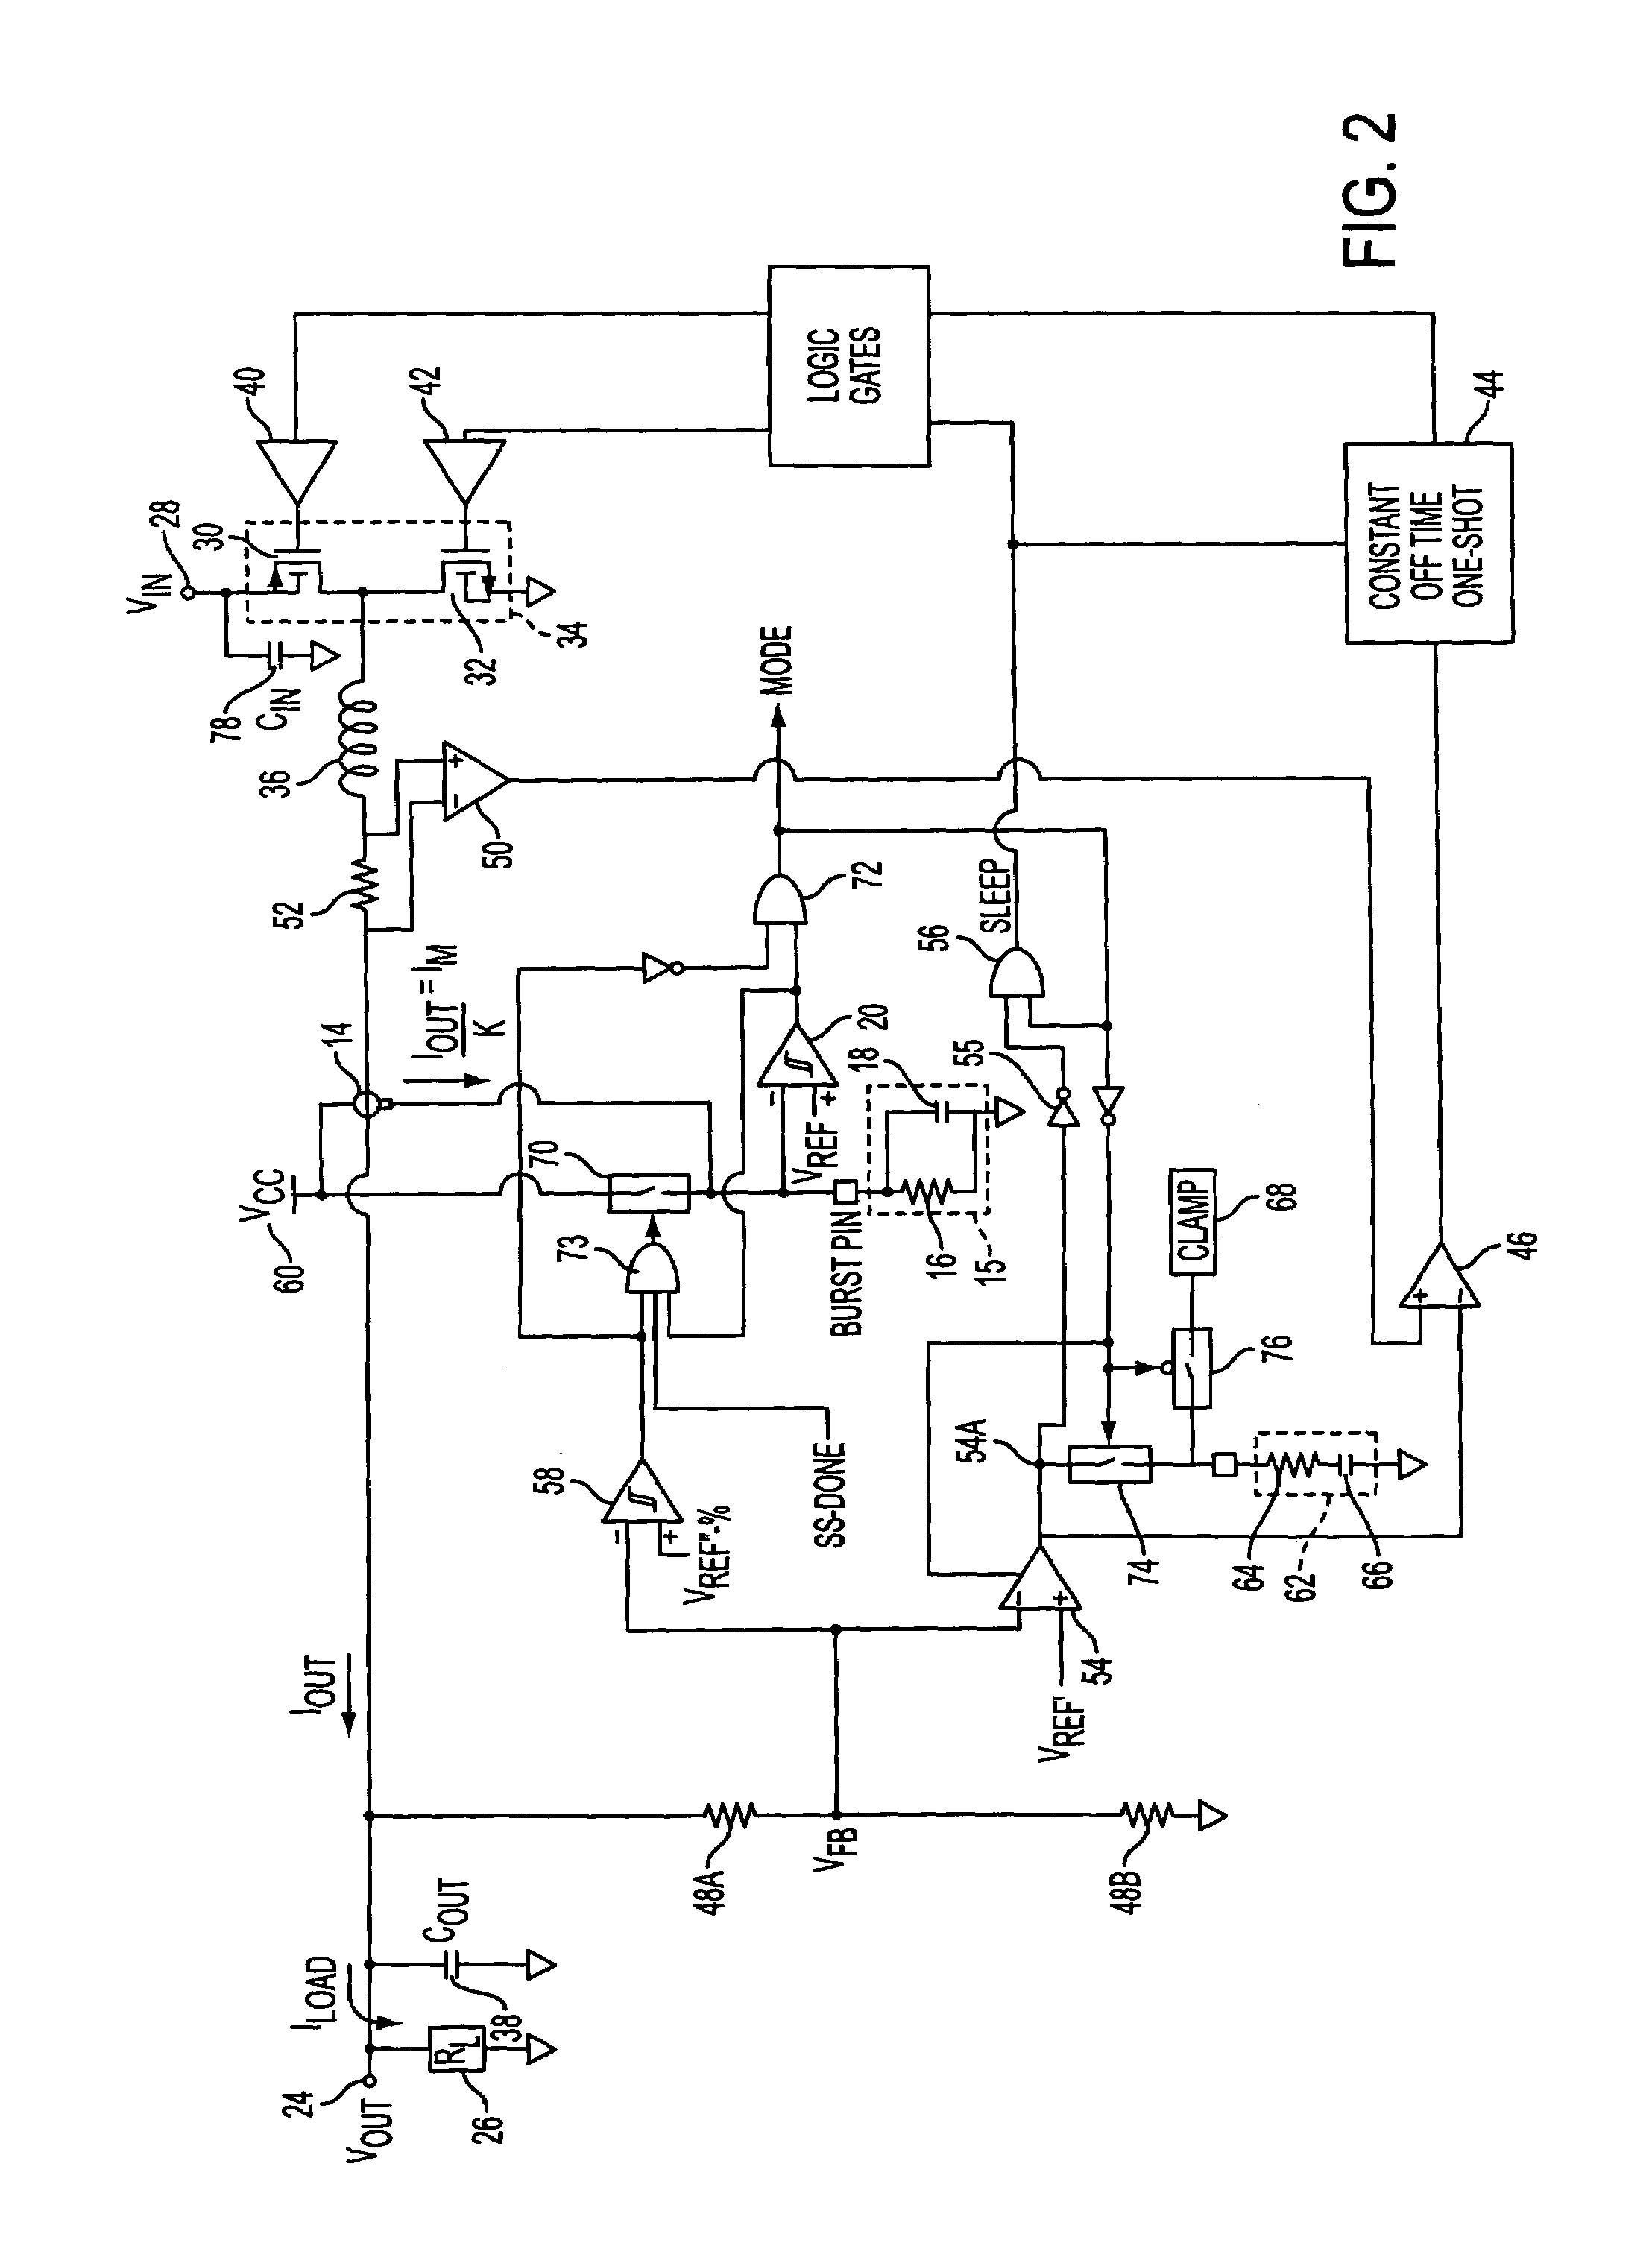 Methods and circuits for programmable automatic burst mode control using average output current